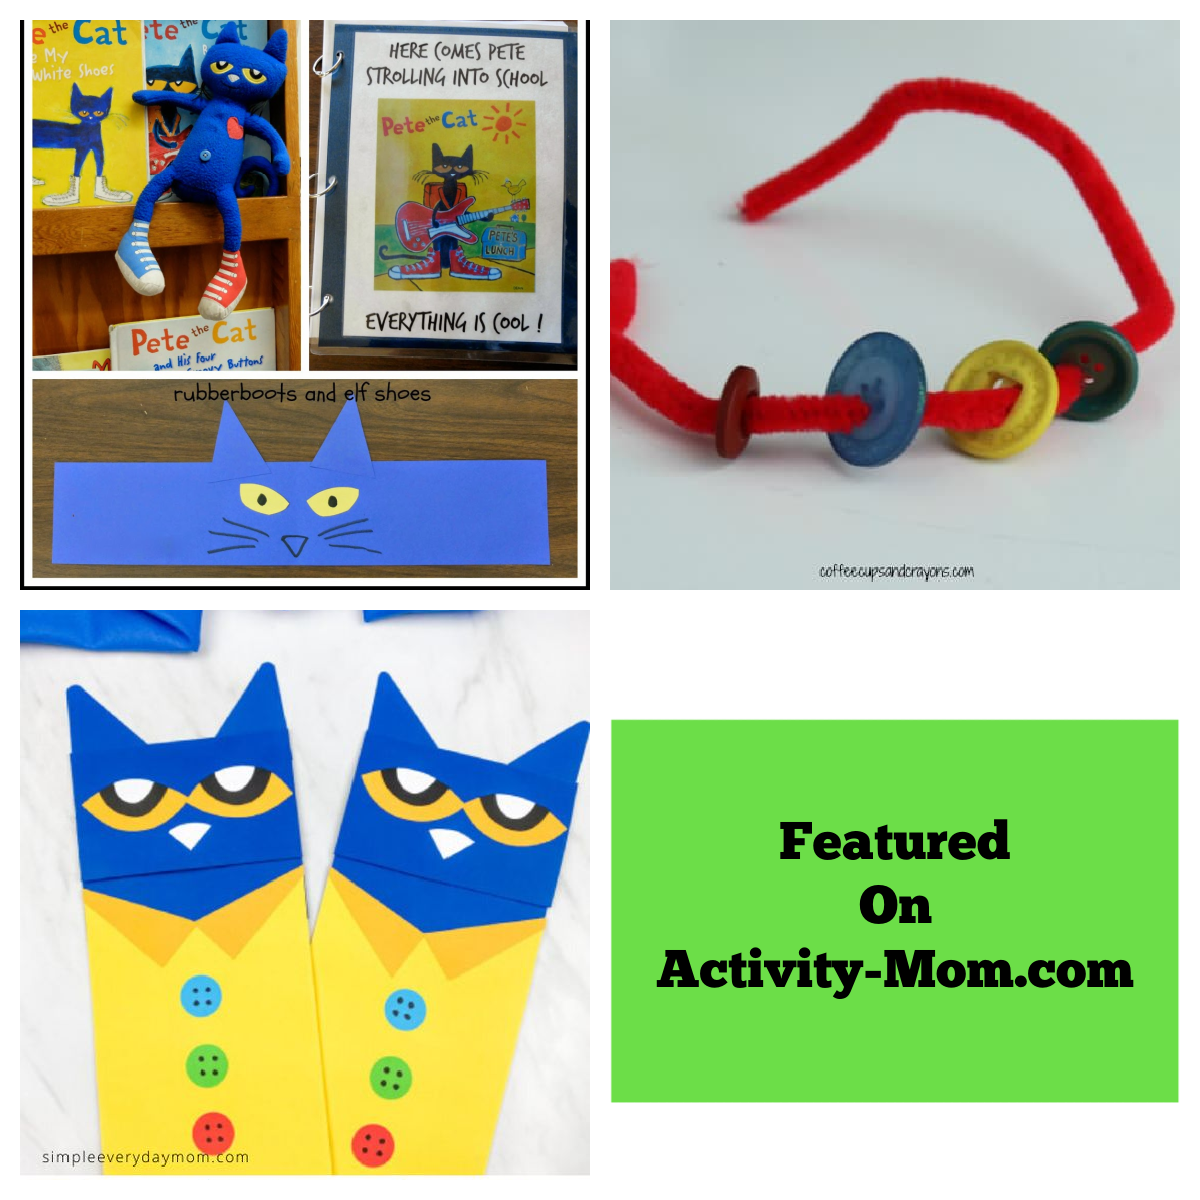 Pete the cat printables and activities free